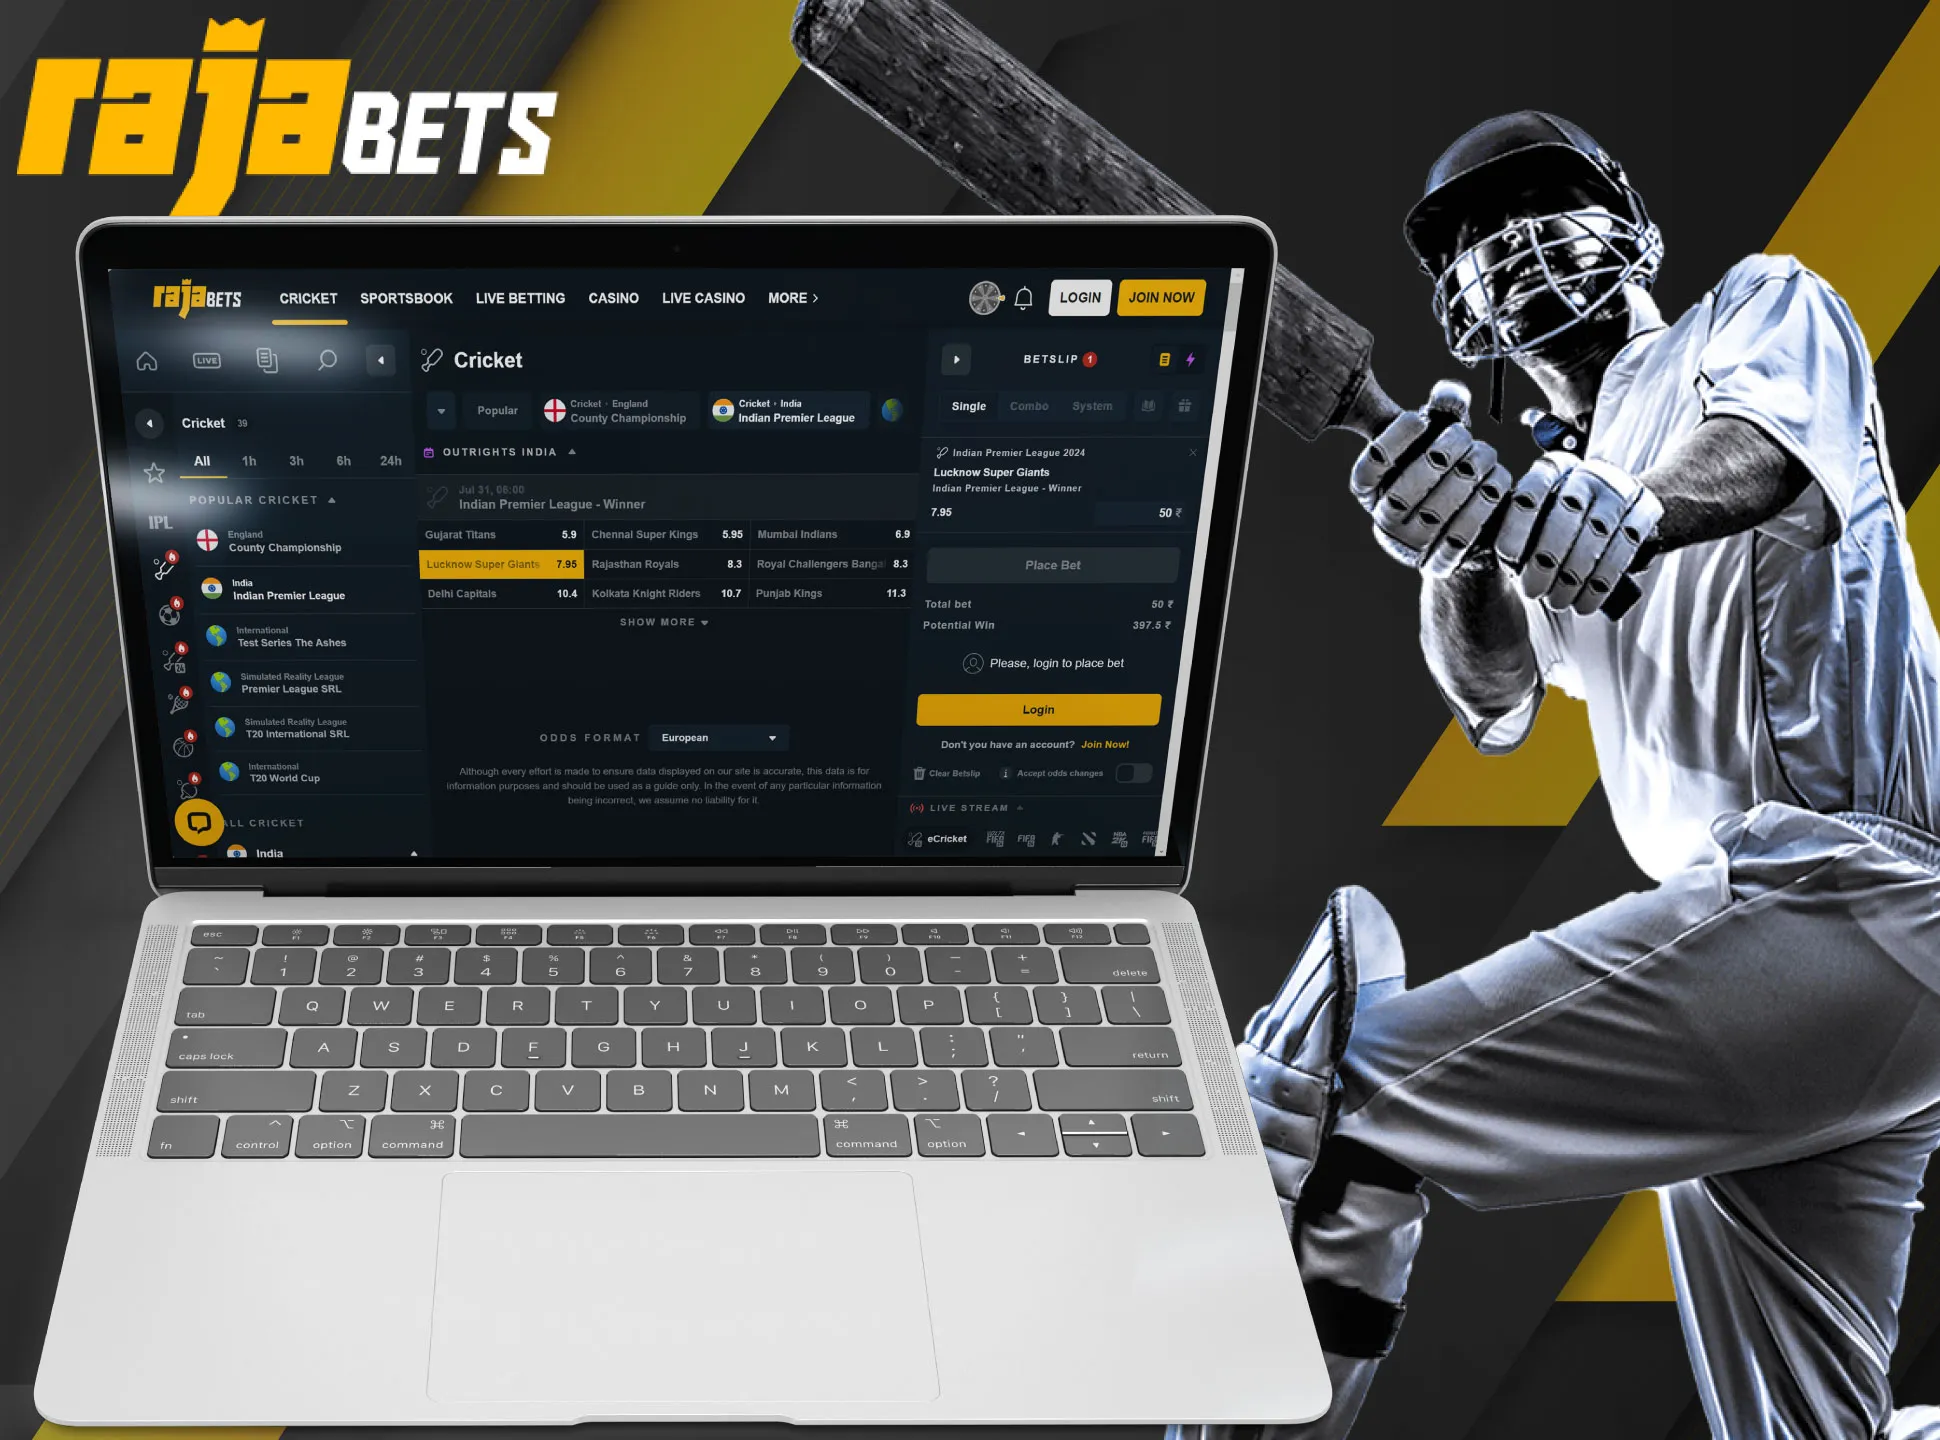 Log in to your account, top it up to start betting on cricket.